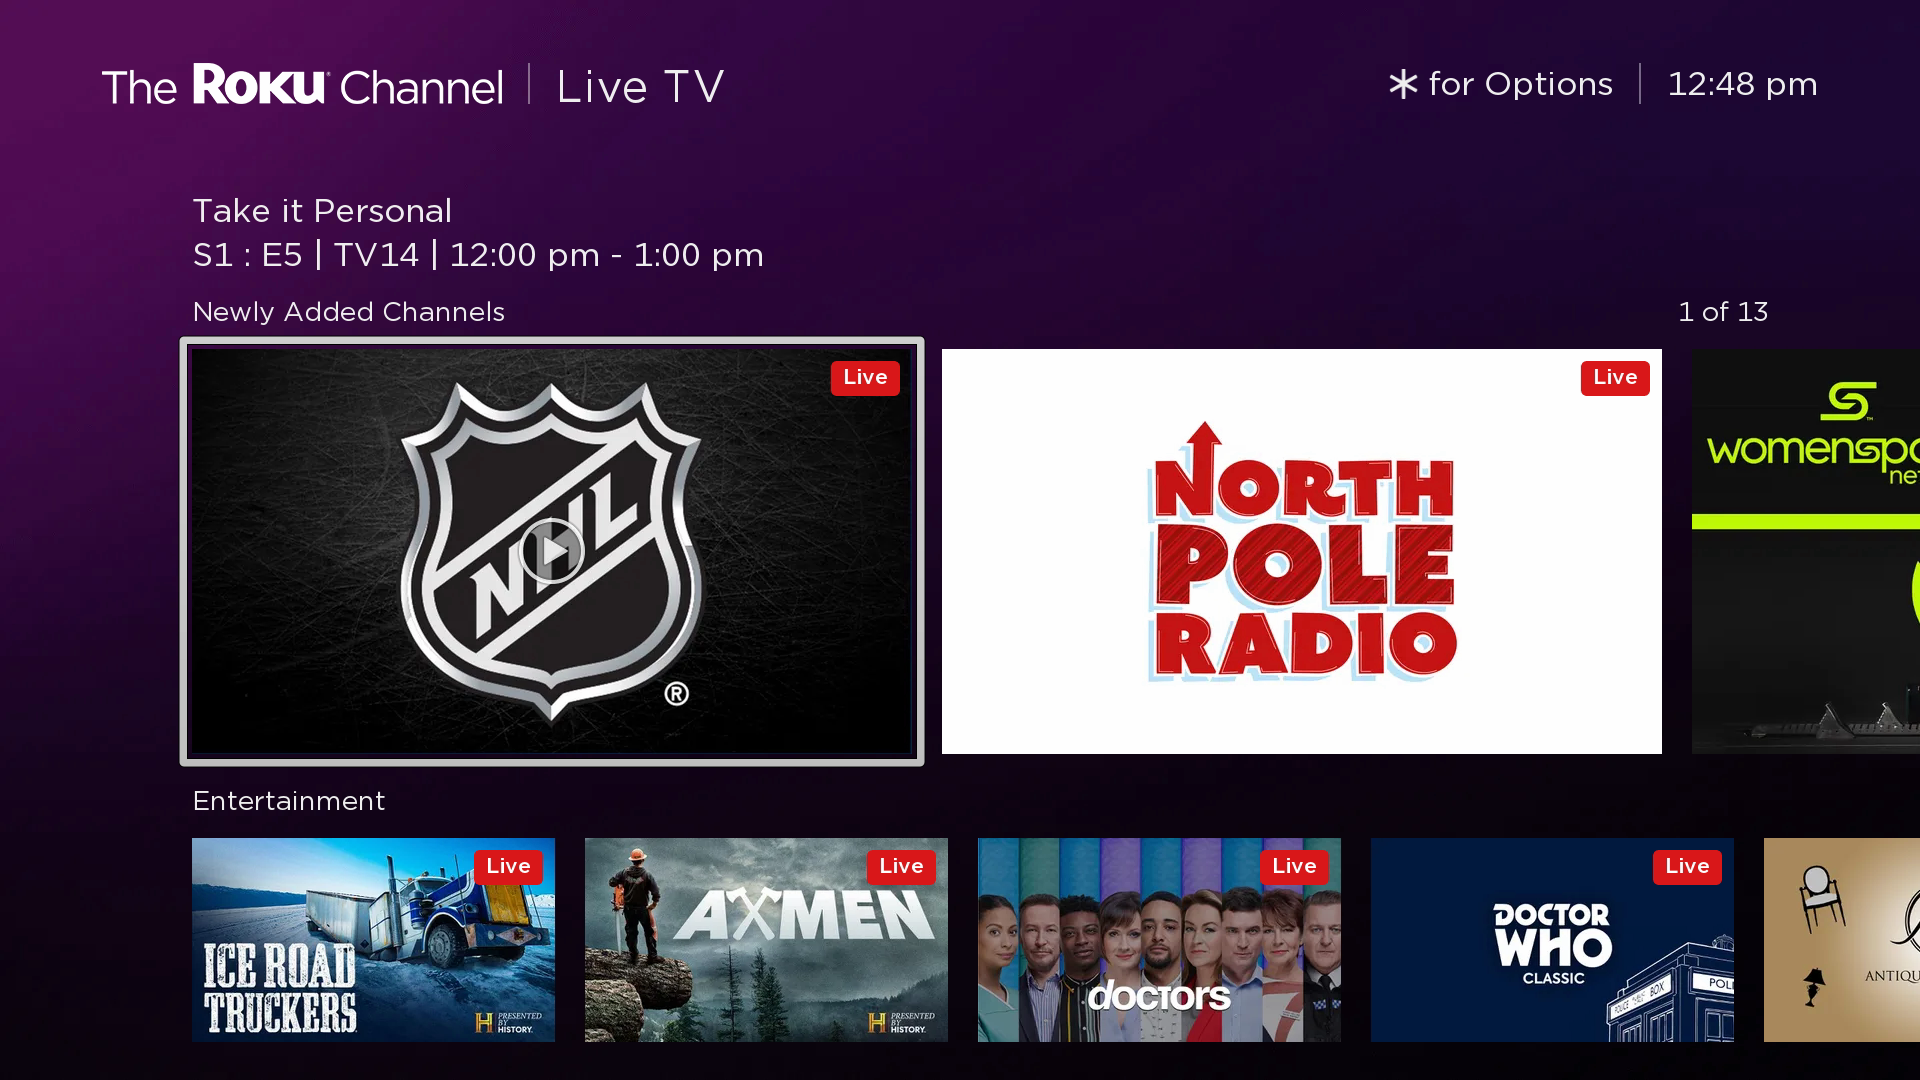 New holiday, sports, and family channels from iHeartRadio, the National Hockey League (NHL), and more now available for free on The Roku Channel